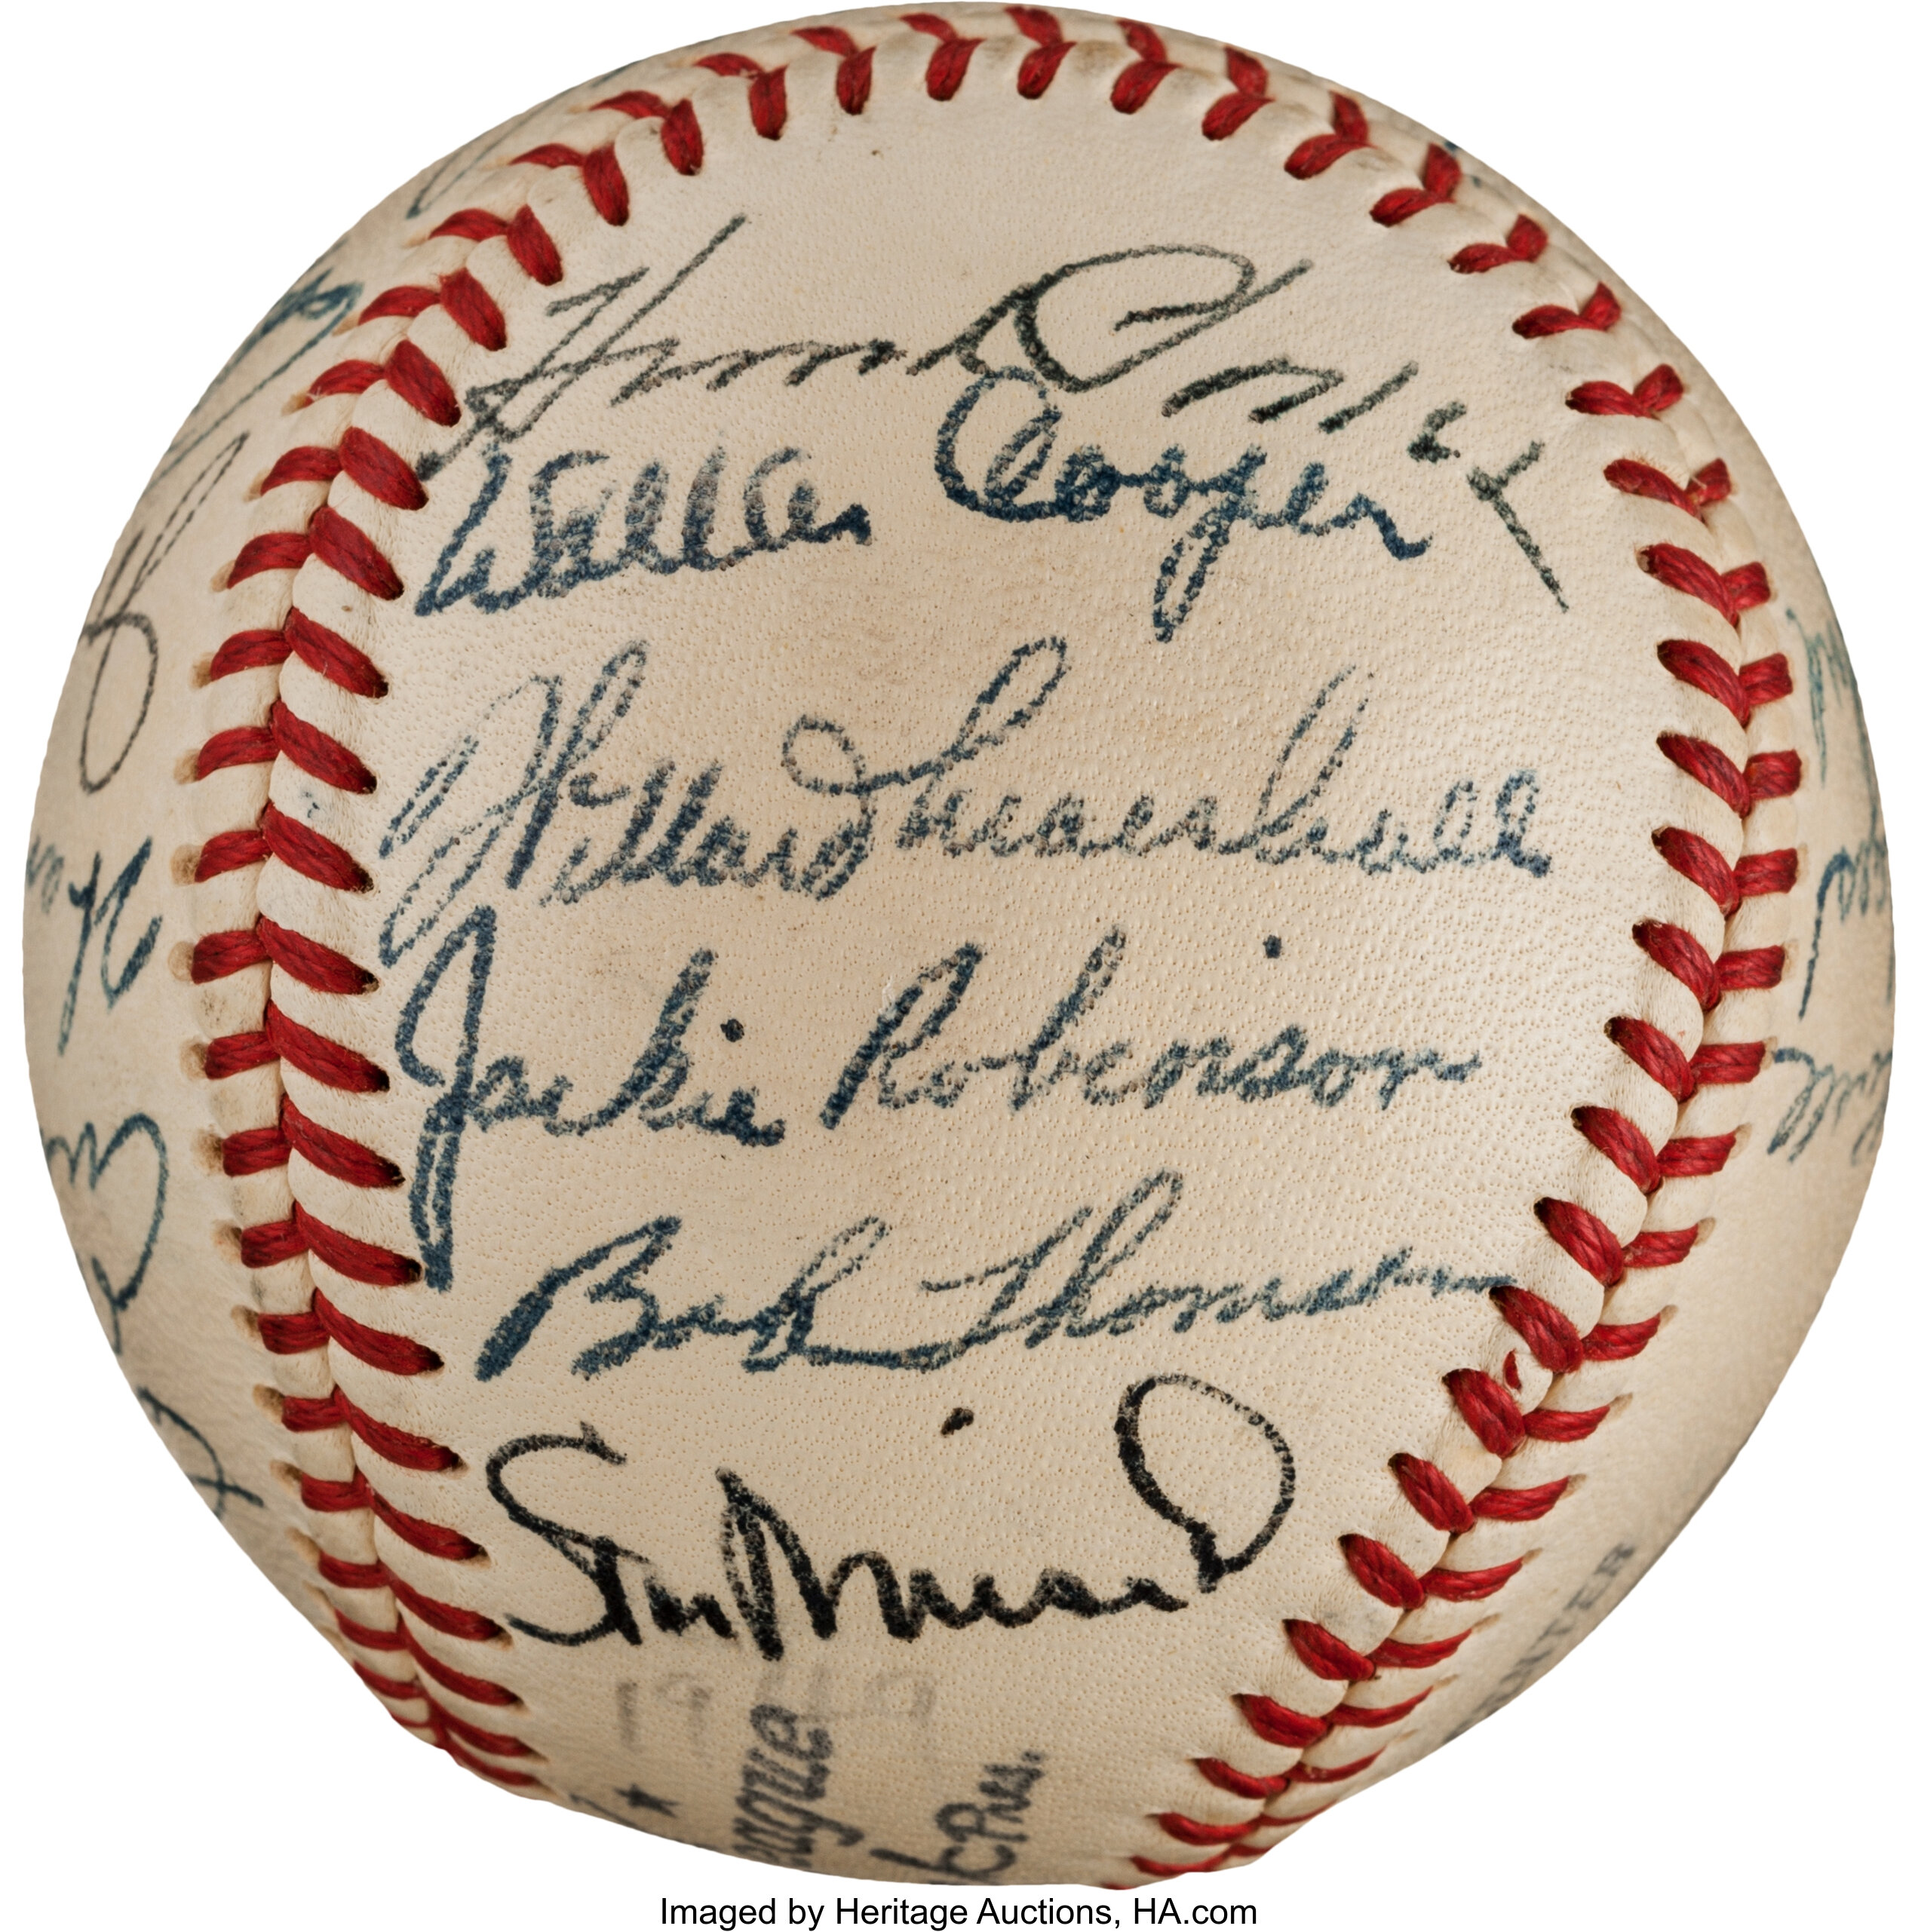 Stan Musial Autographed Official National League Baseball - PSA/DNA 8.5